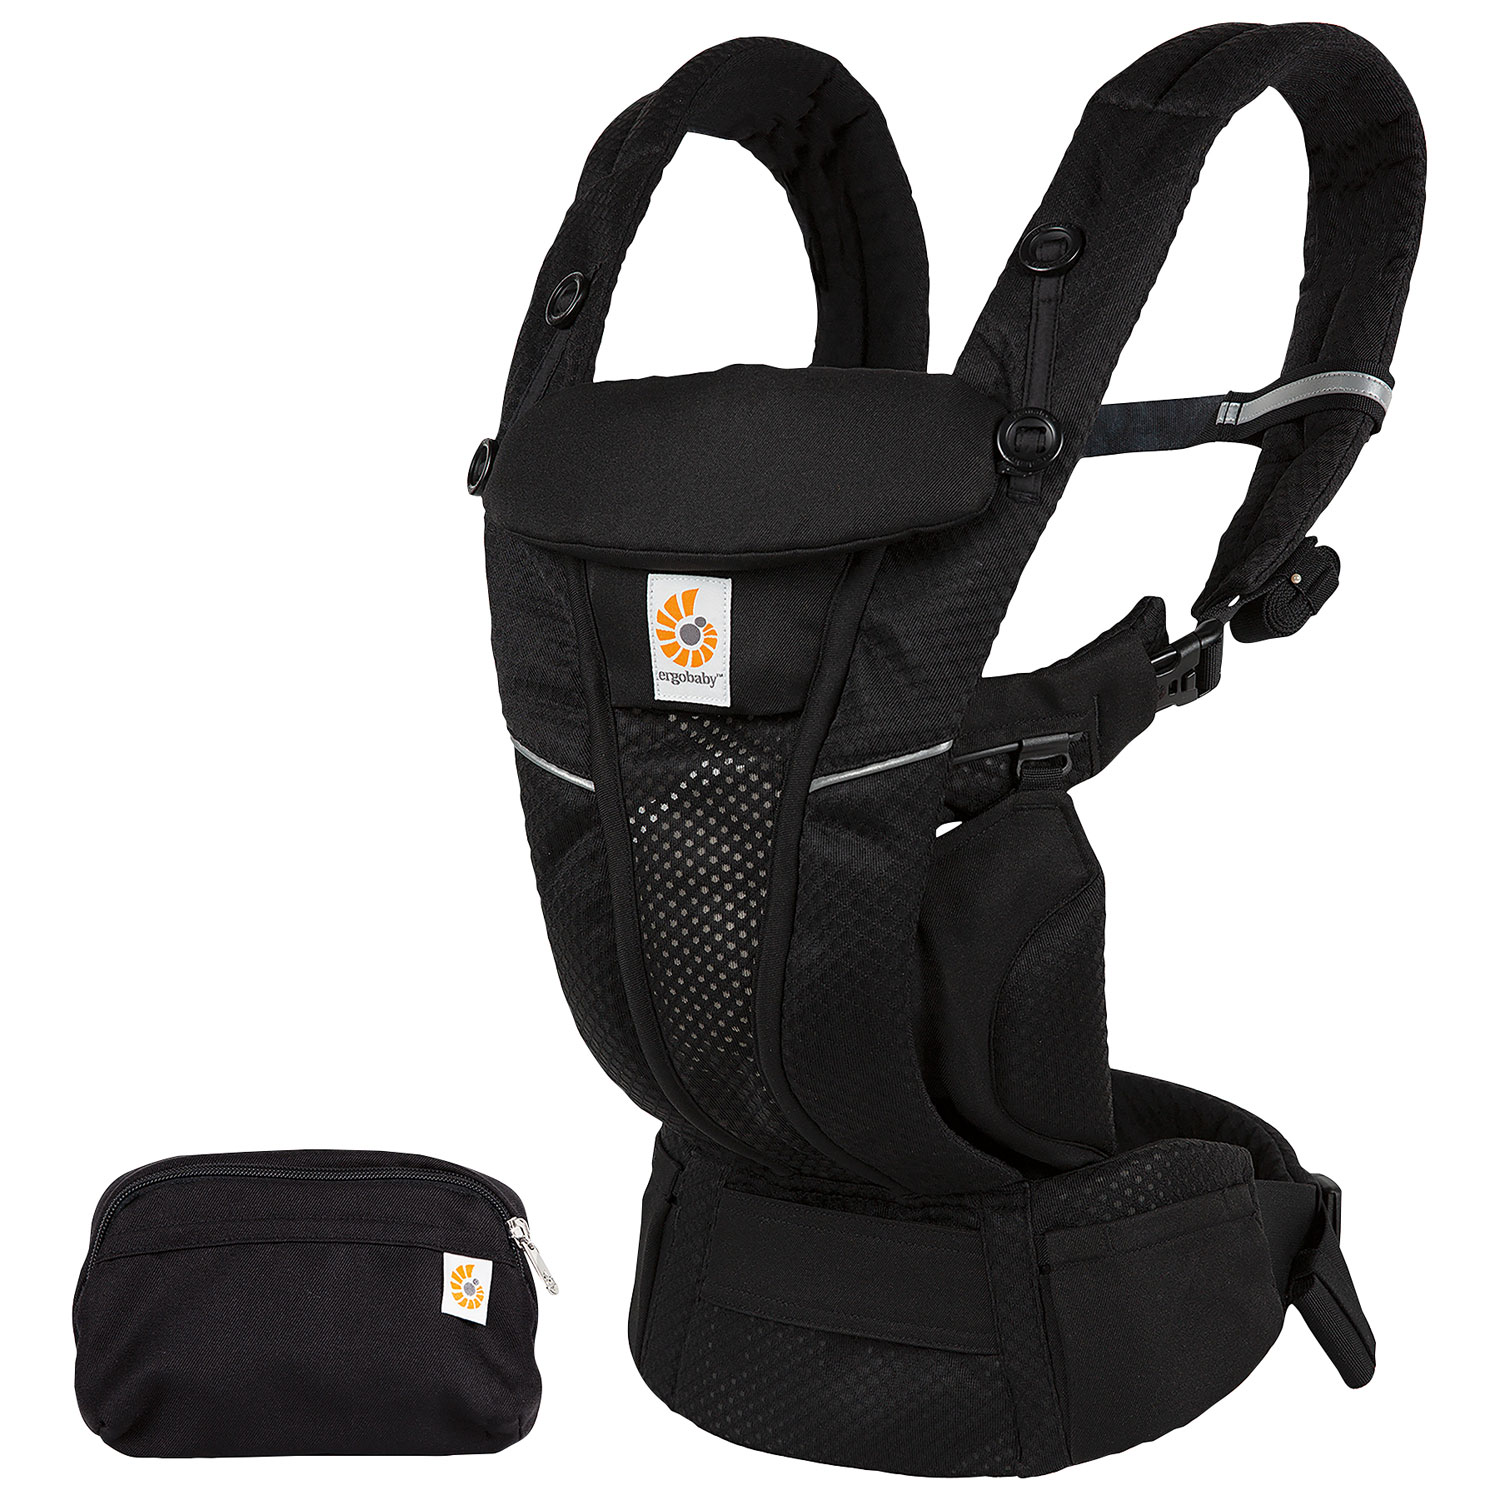 Ergobaby Omni Breeze Four Position Baby Carrier - Onyx Black